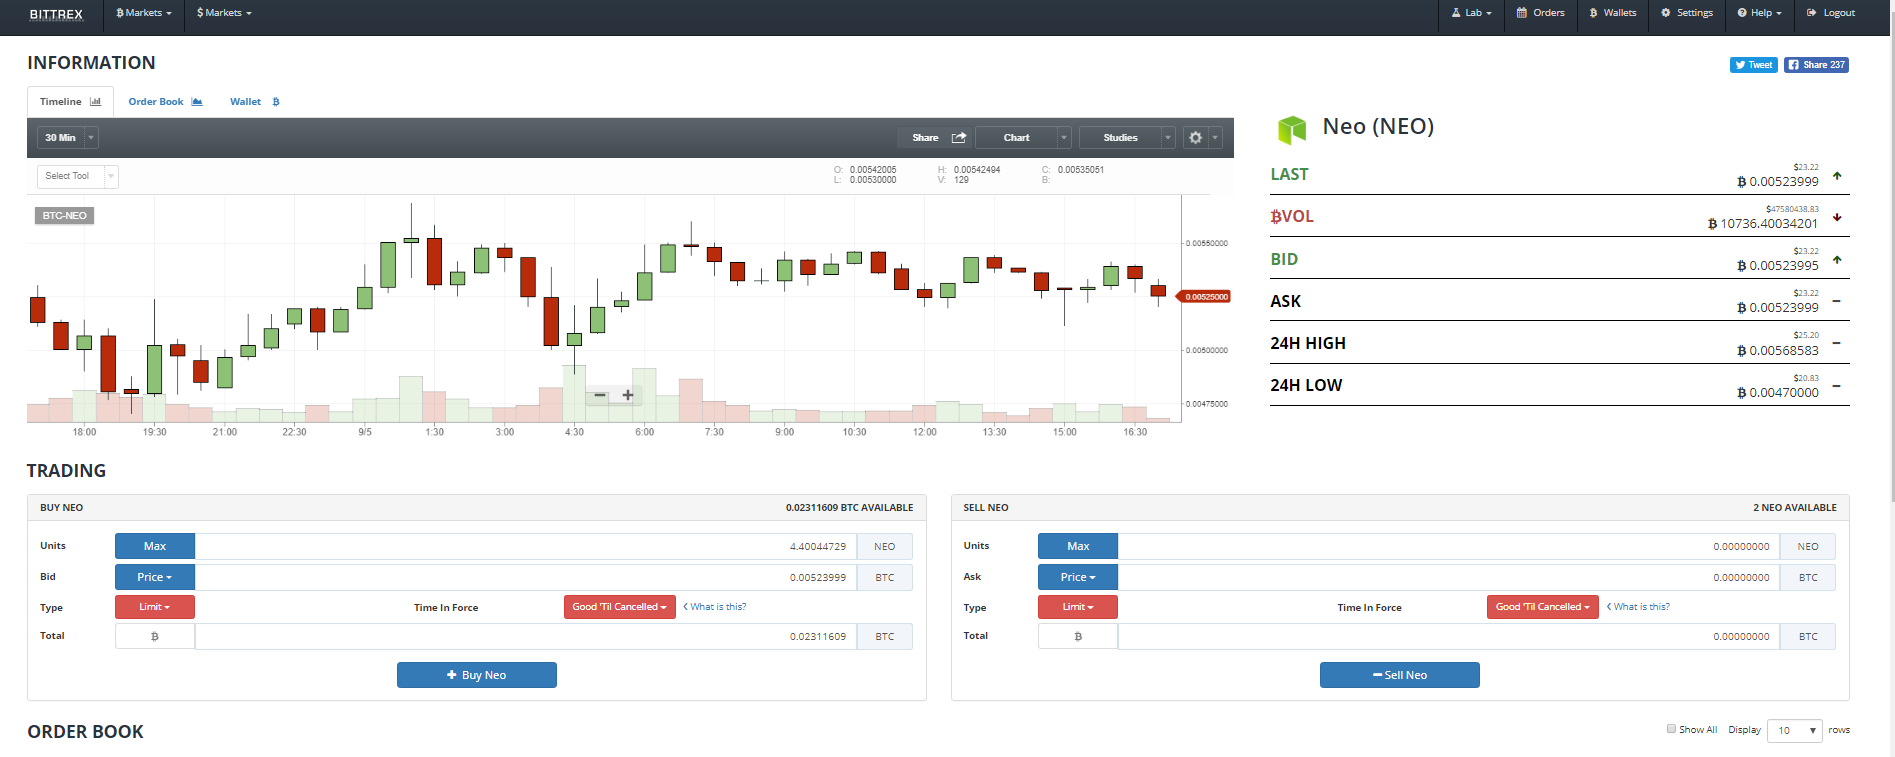 How to Trade in Bittrex? Complete Guide to Buy & Sell Cryptocurrency on Bittrex